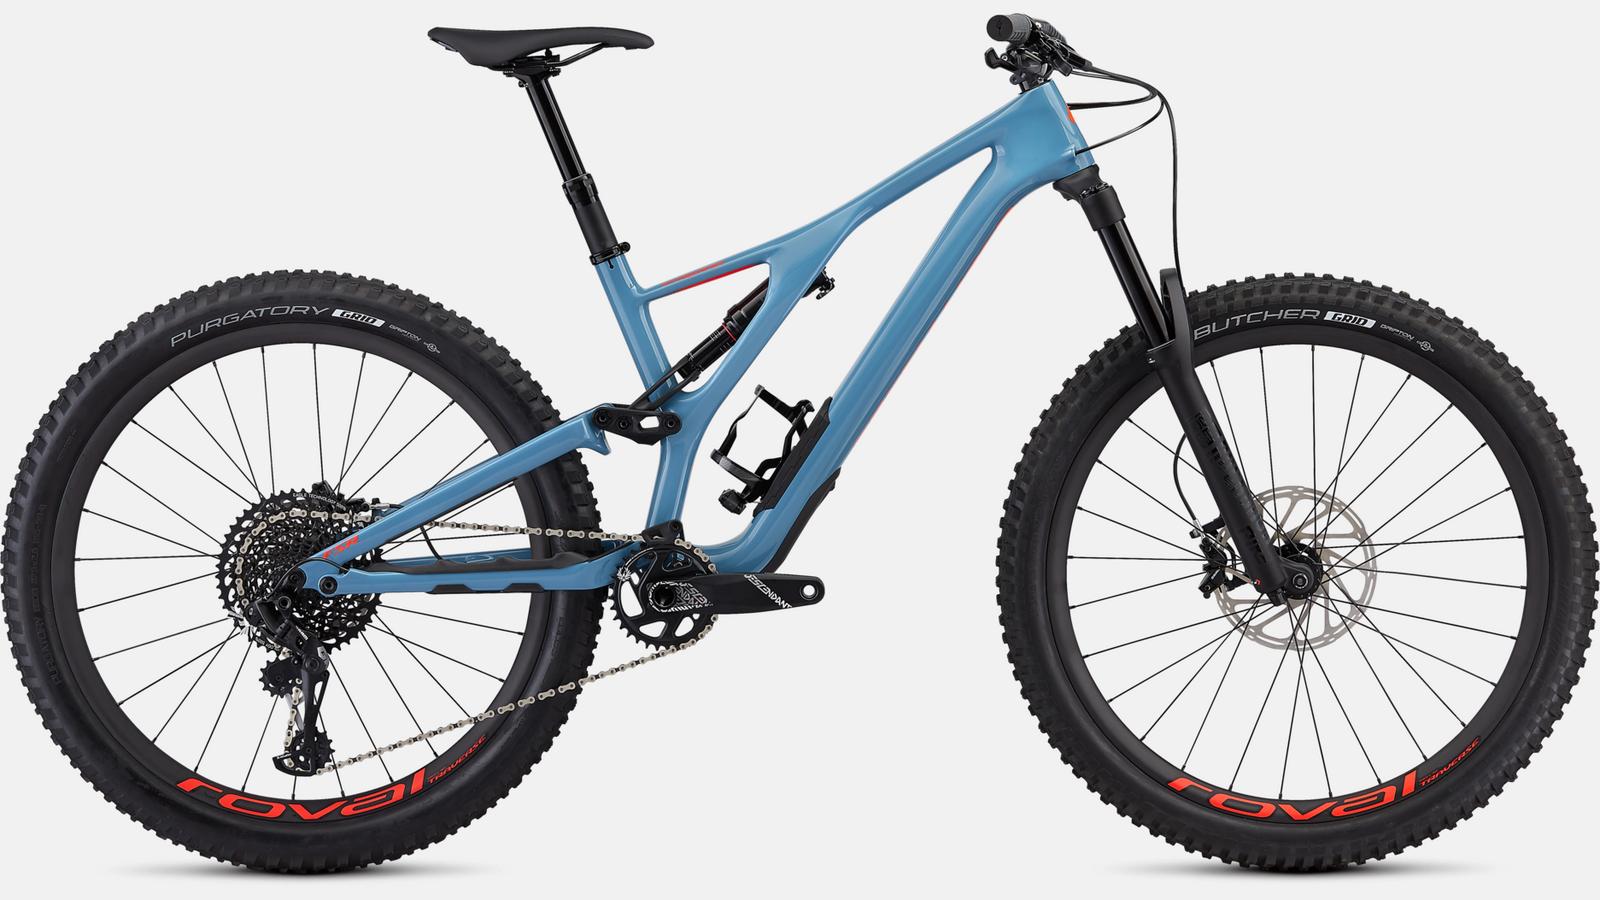 Paint for 2019 Specialized Men's Stumpjumper Expert 27.5 - Gloss Storm Grey